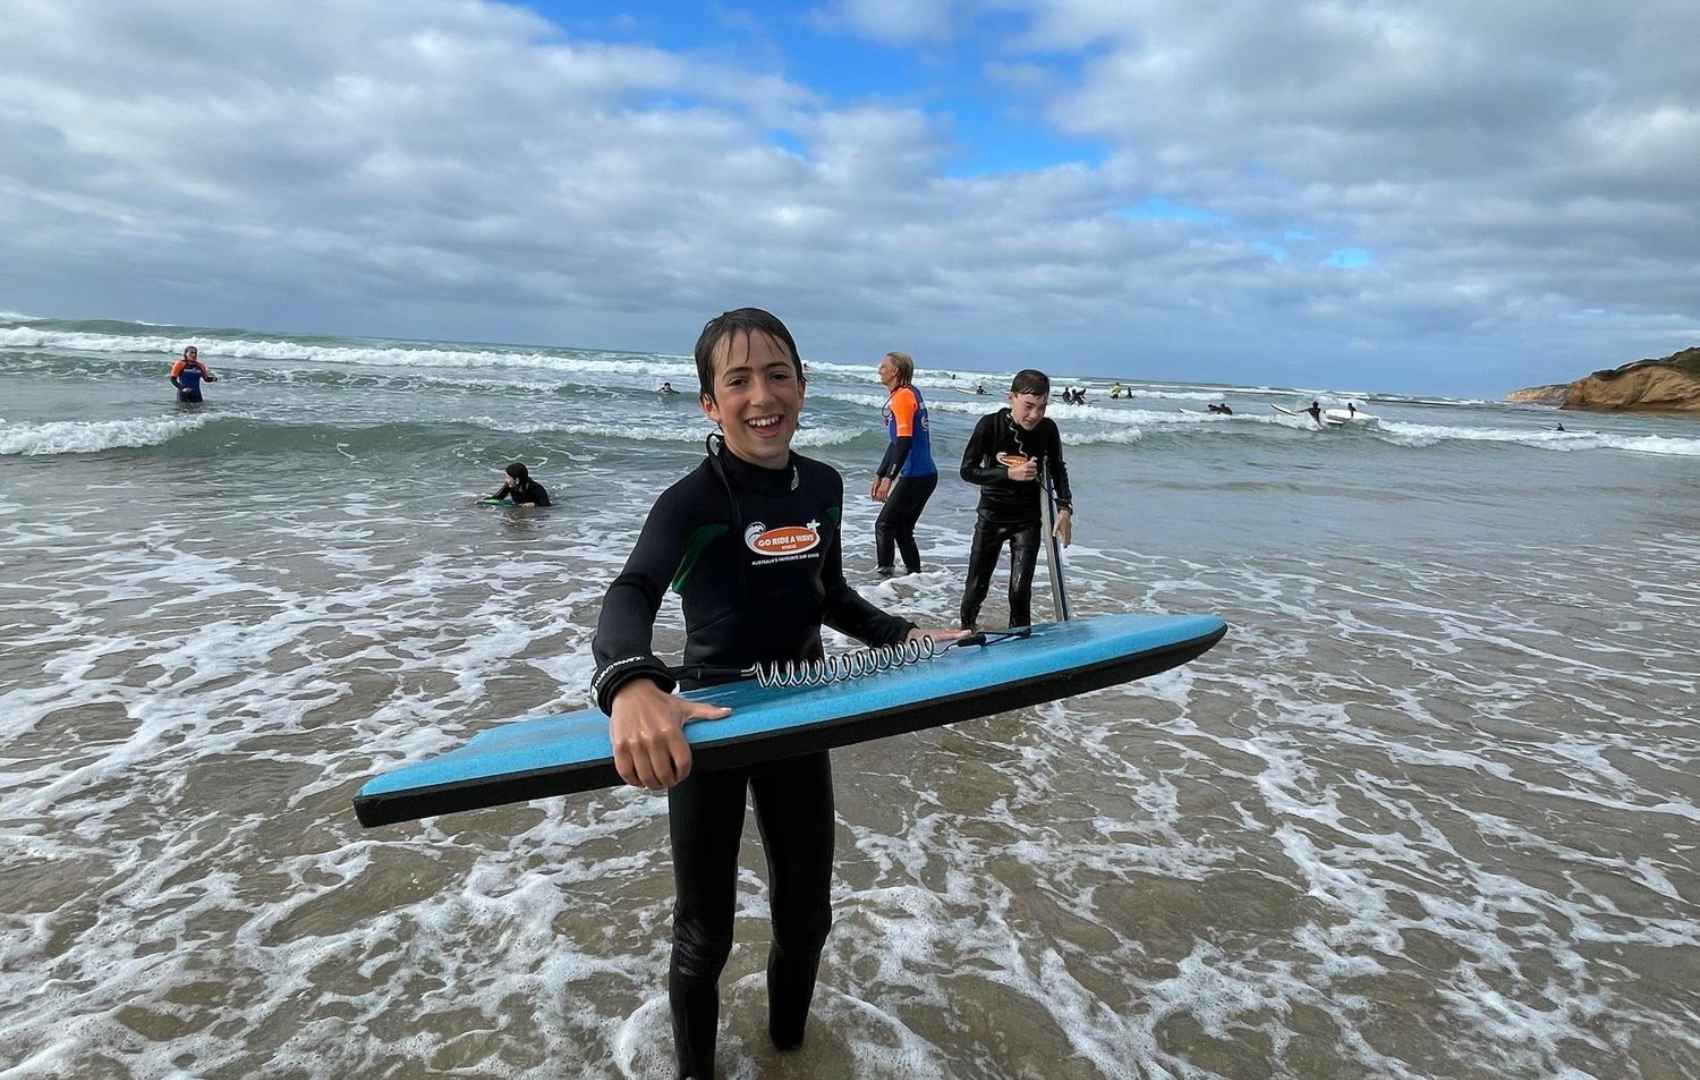 A Year 7 student is wearing a black wet suit and holding a blue body board. The student is standing in the ankle-deep sea, they have just been riding the waves.